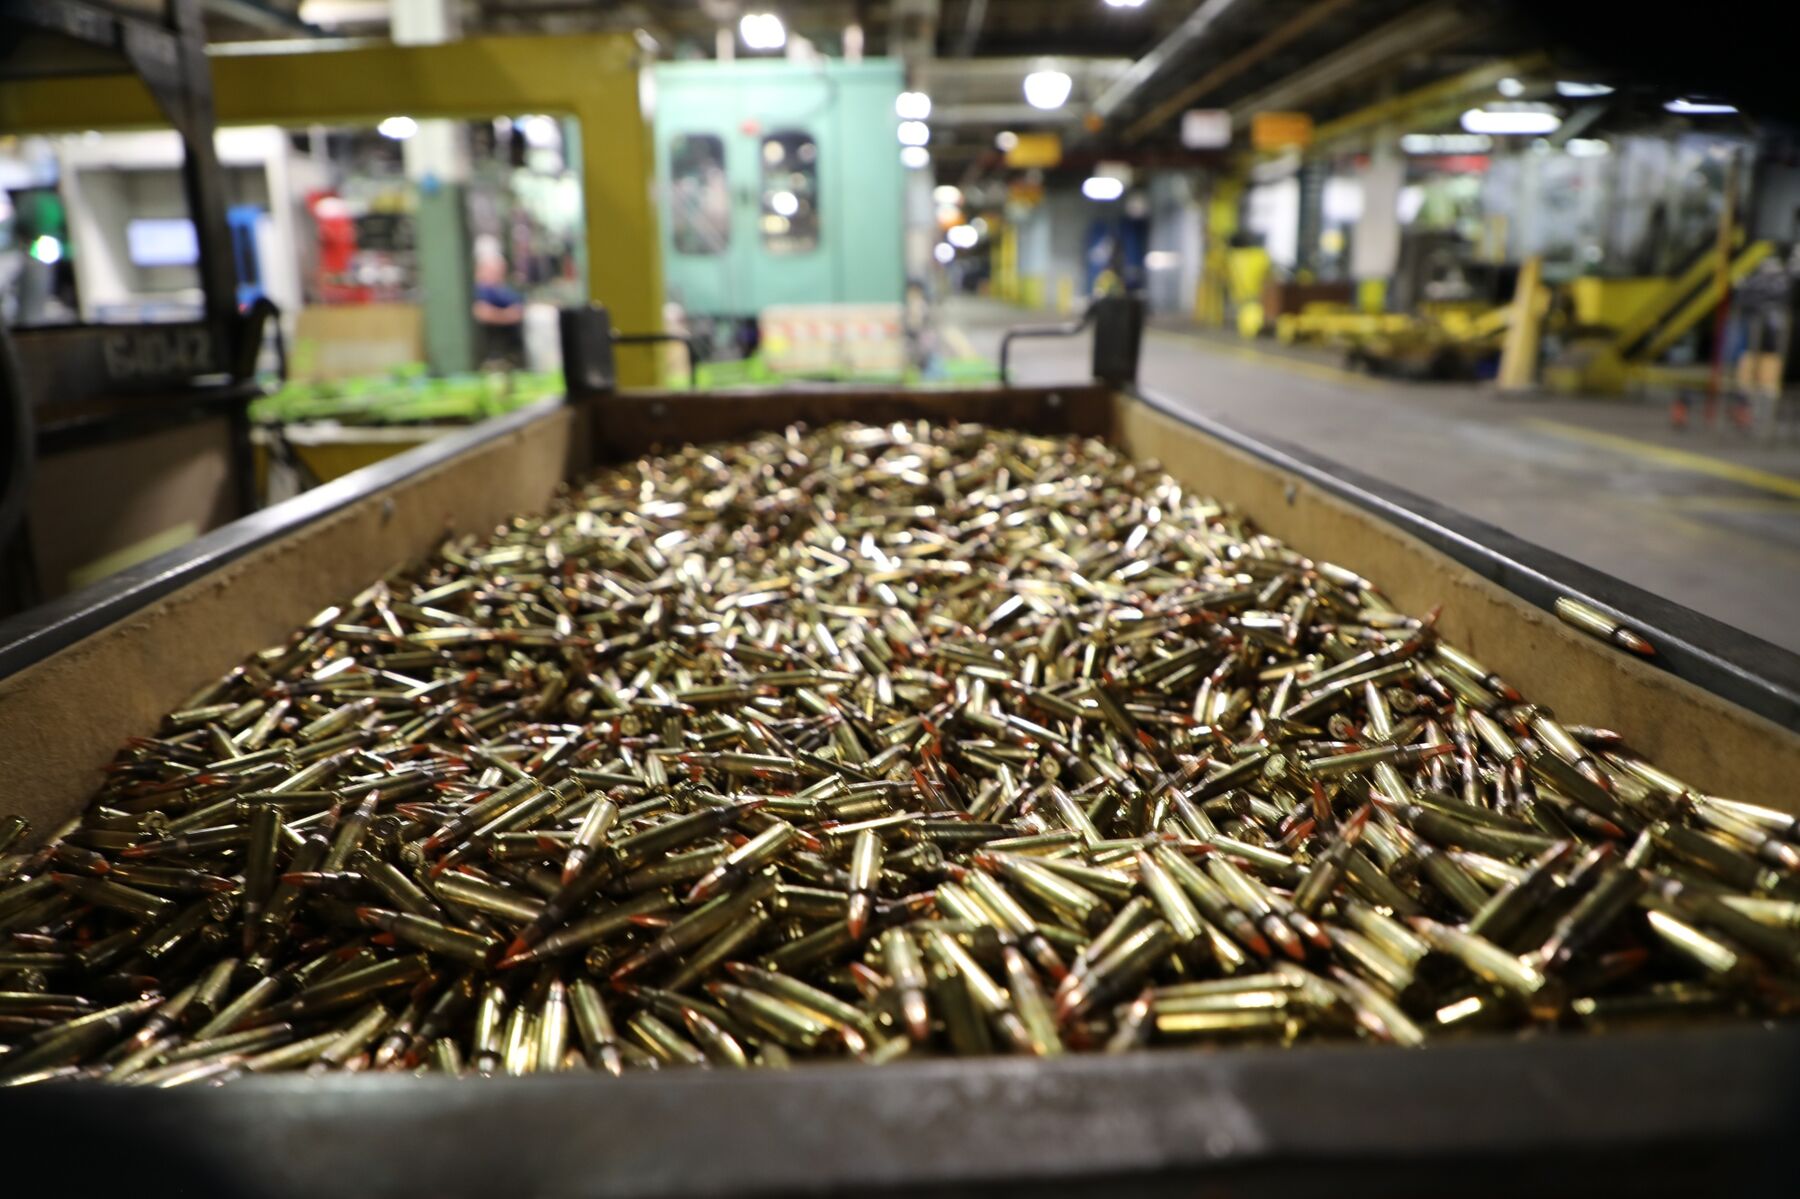 Mass US-Made Gun Exports Are Fueling Violence, Shootings Globally